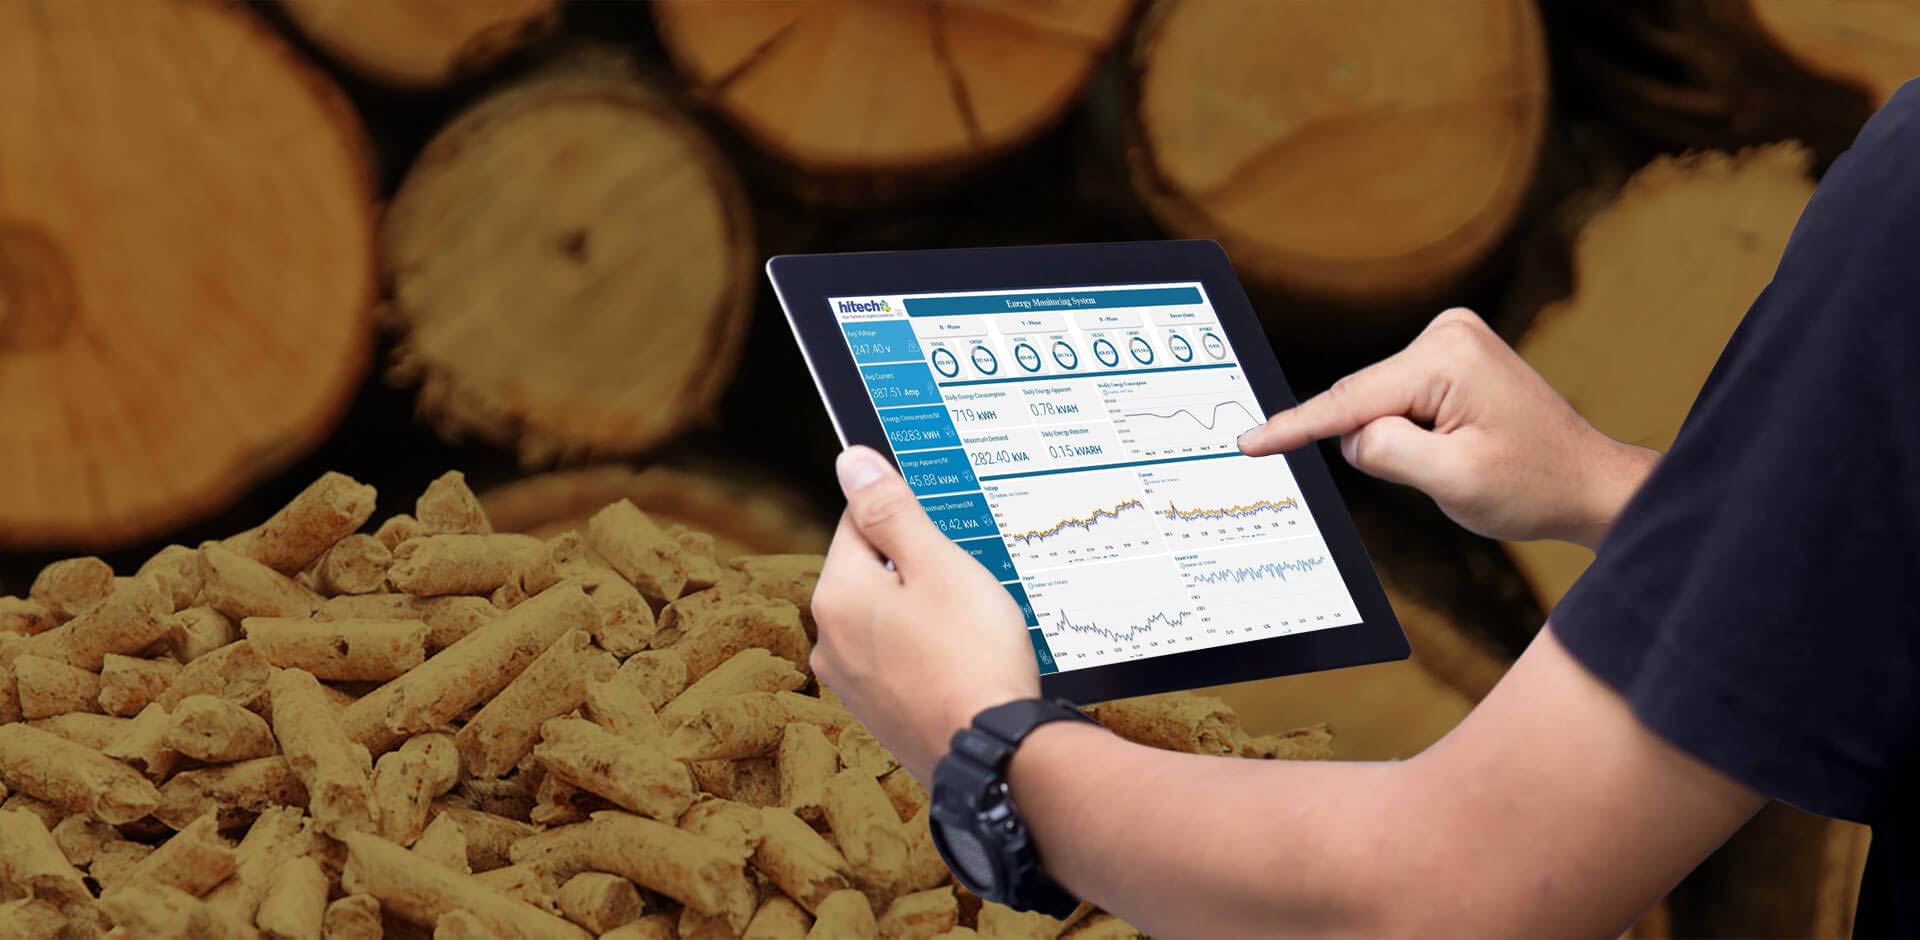 Real-time energy monitoring improves energy usage and feeders’ performance visibility for wooden pellets manufacturer Banner